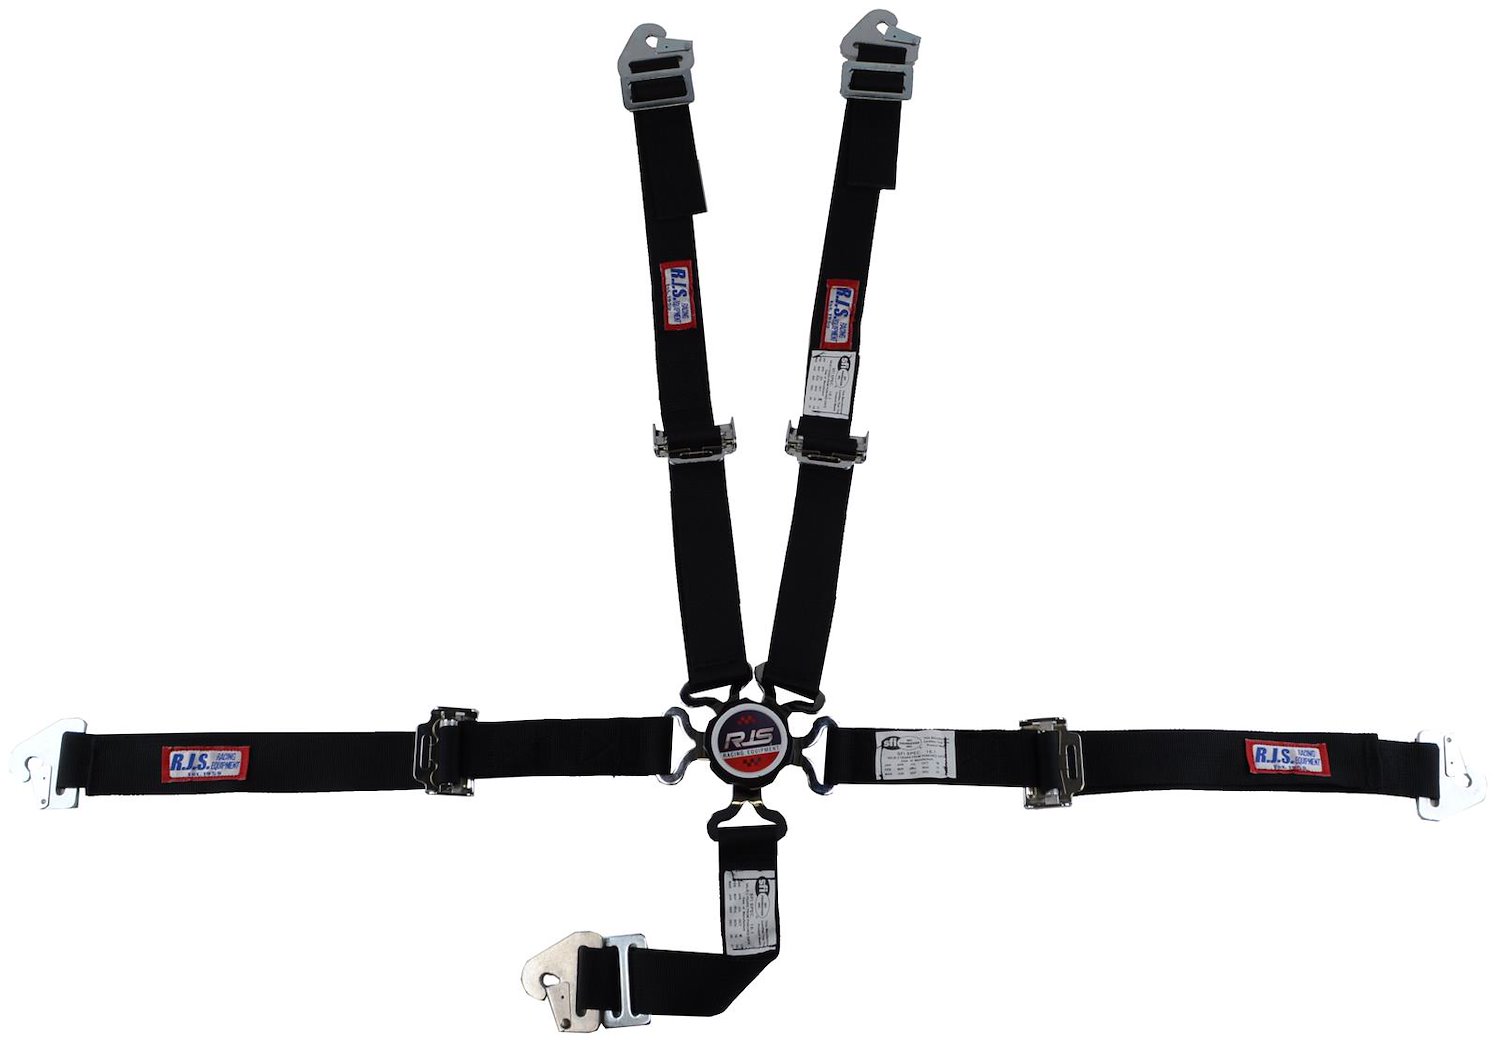 SFI 16.1 CAM-LOCK HARNESS 2 PULL UP Lap Belt 2 Shoulder Harness Individual FLOOR Mount 2 DOUBLESub ALL WRAP ENDS YELLOW